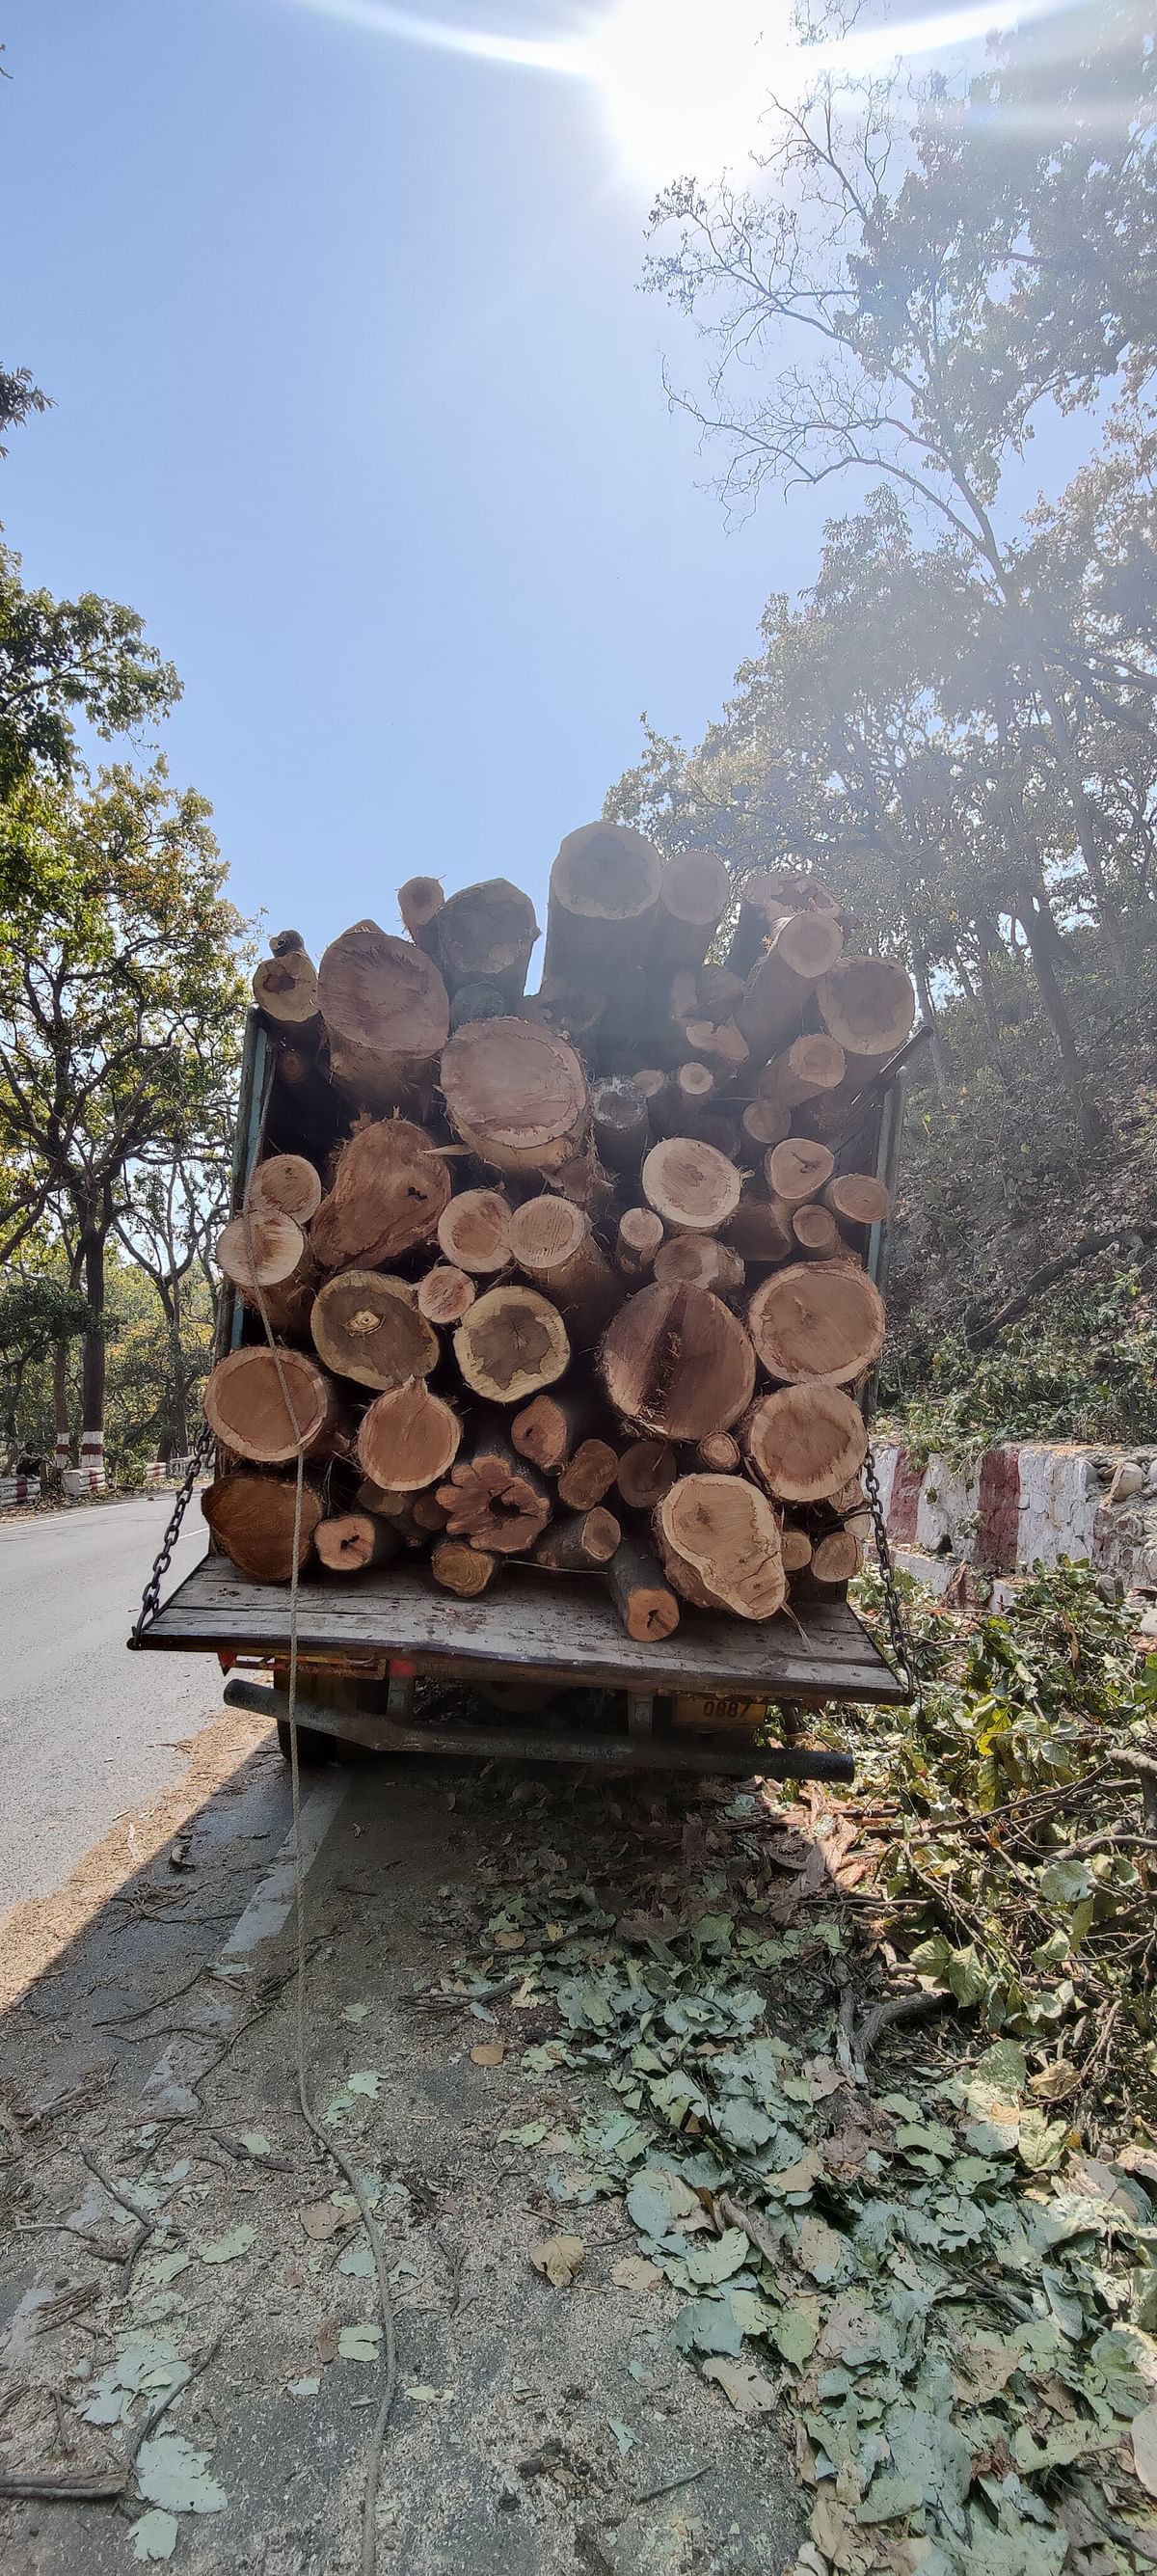 Nearly 2,500 British-era Sal trees are being axed for the expansion of the Delhi-Dehradun expressway.